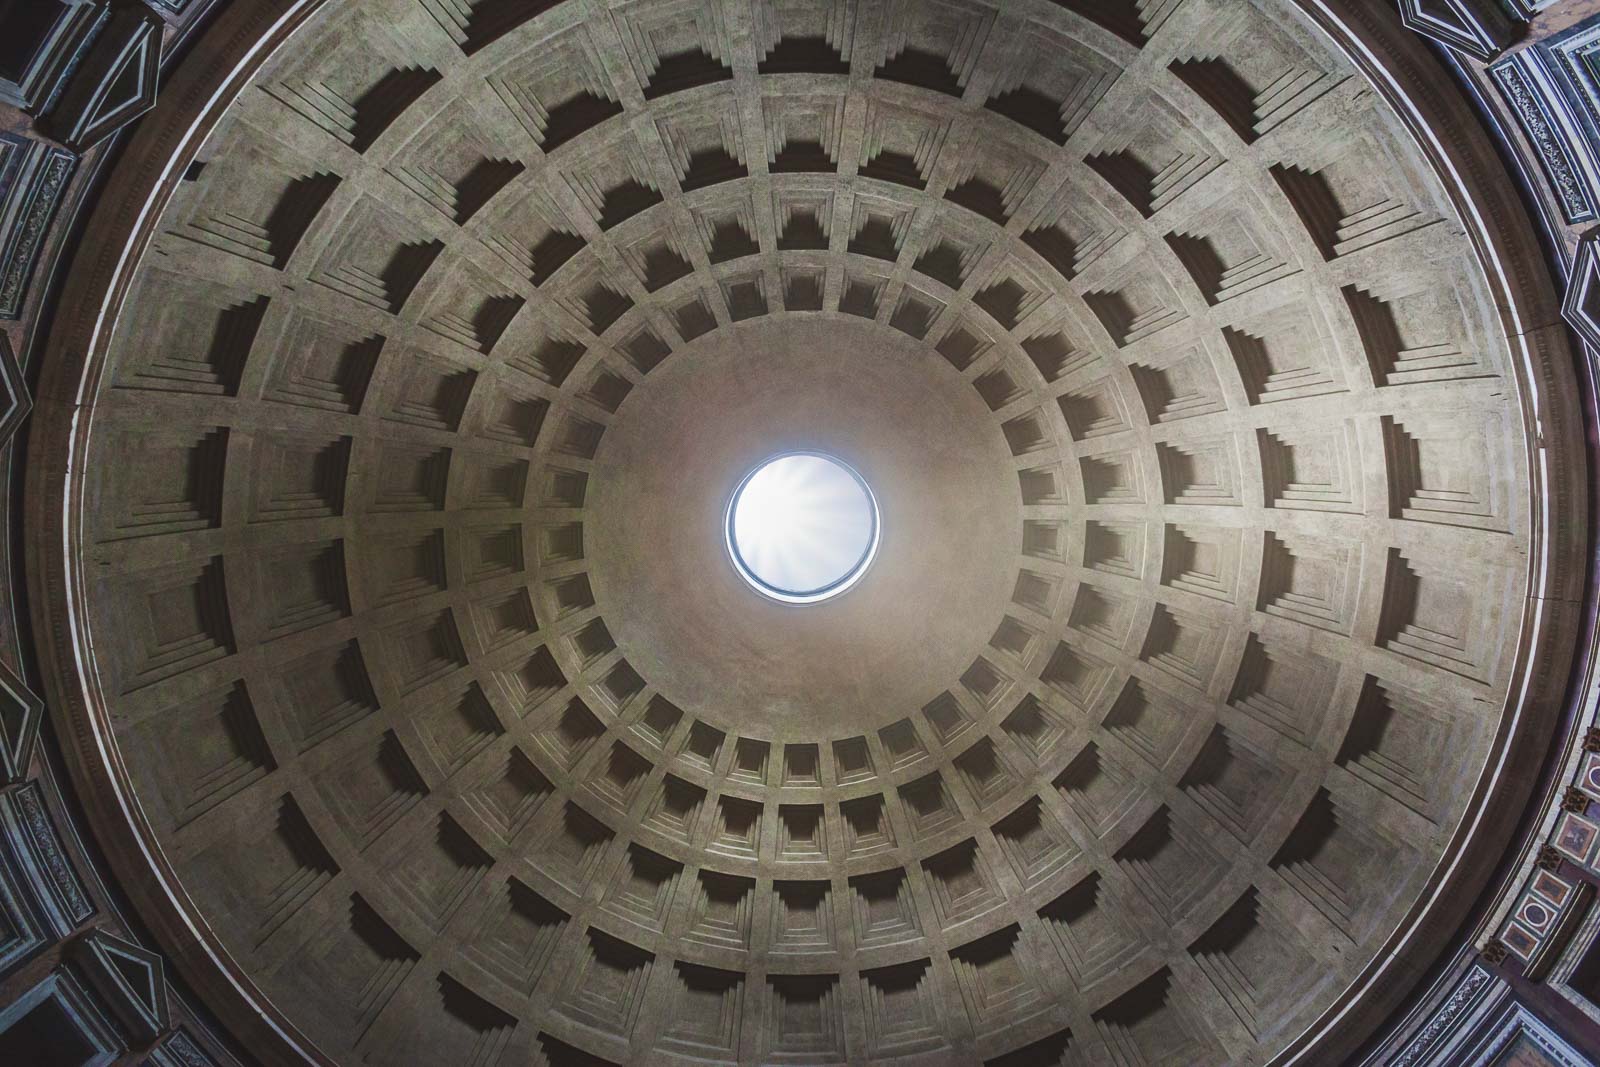 The Pantheon in Rome is a giant sundial